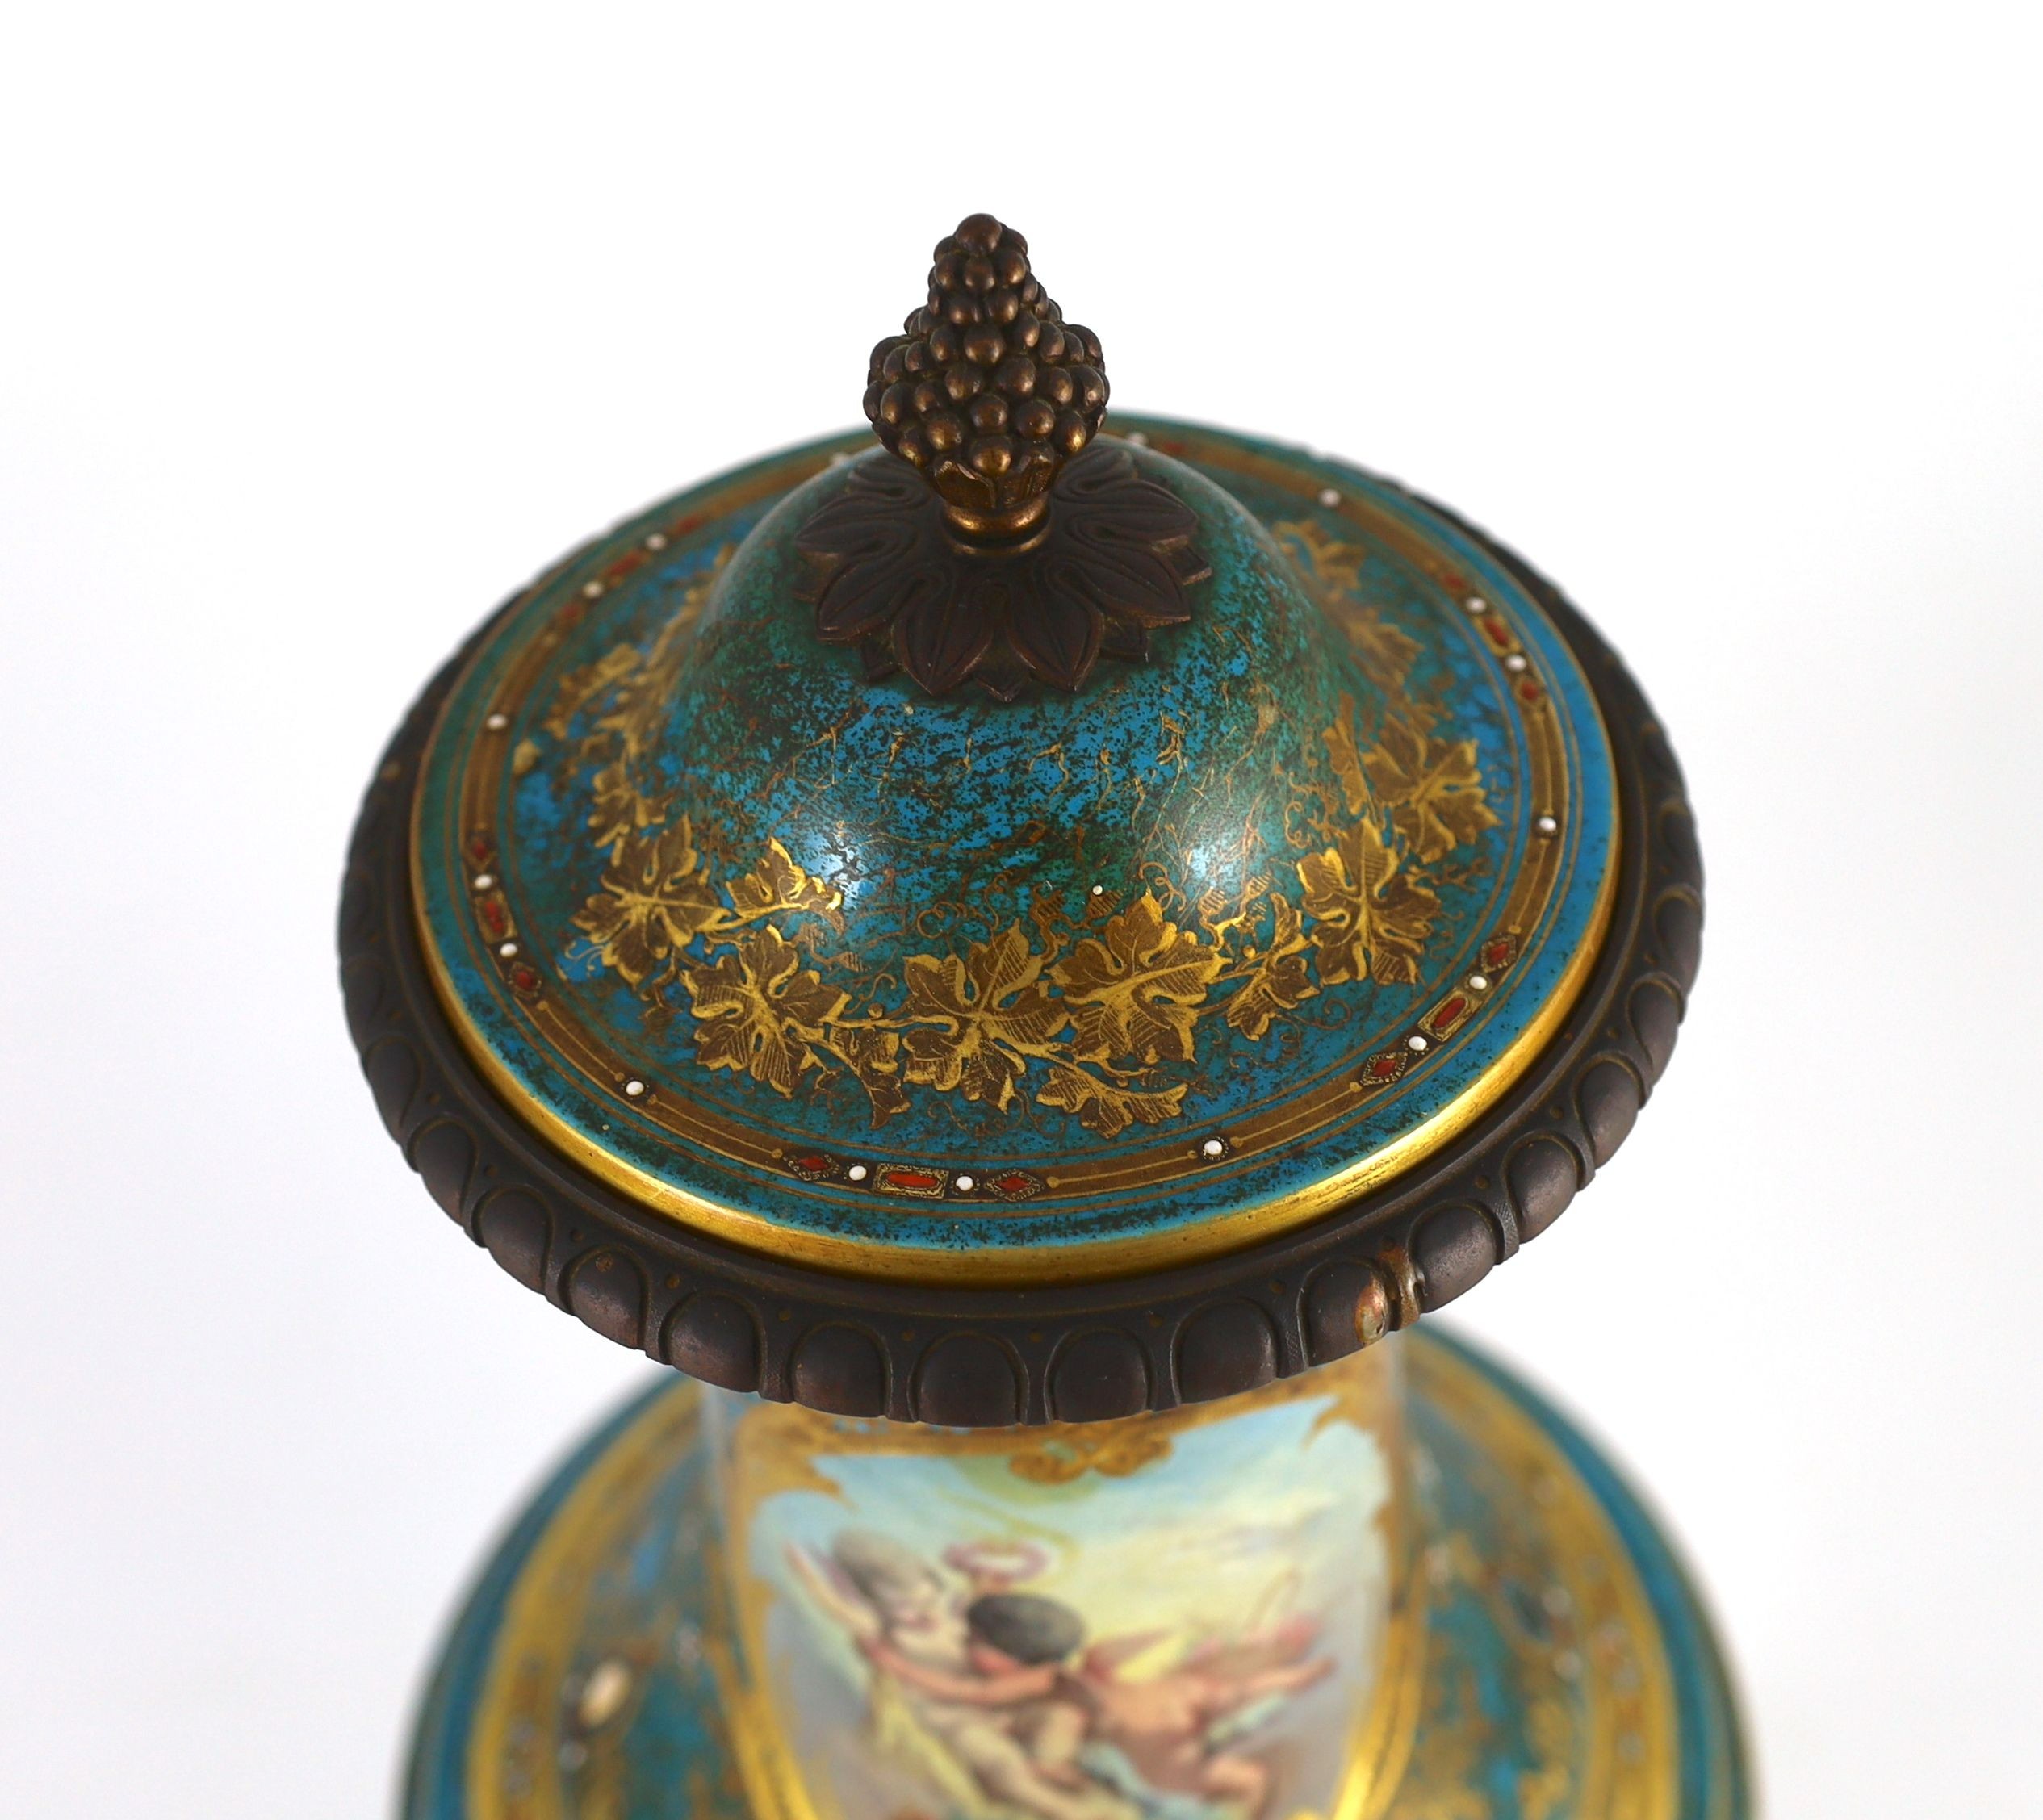 A large Sevres style porcelain ormolu mounted vase and cover, late 19th century, 61.5cm high, stained